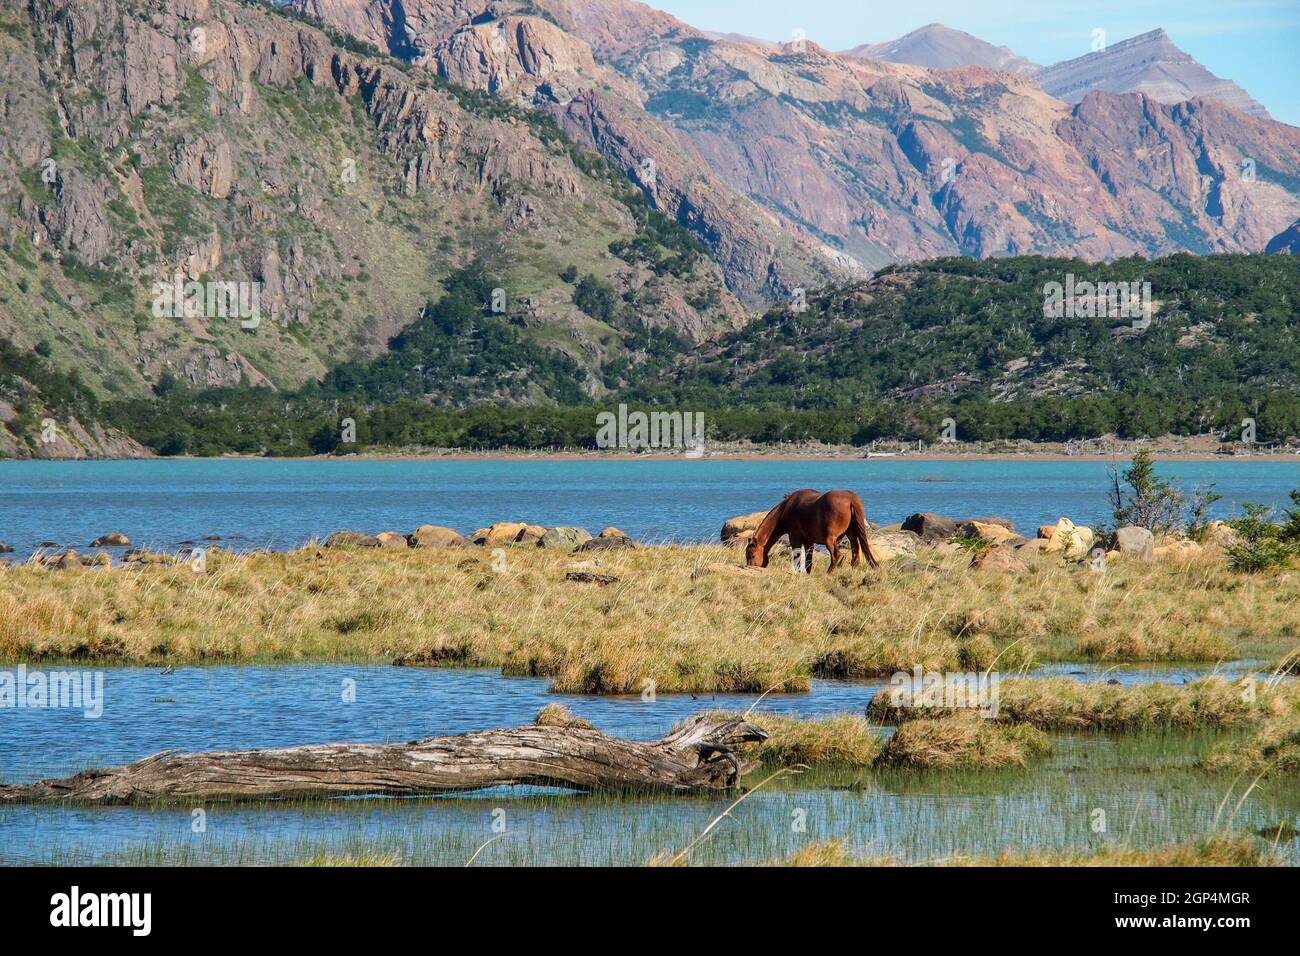 beautiful patagonia scenery with lakes, mountains and a horse near El Chalten, Argentina Stock Photo